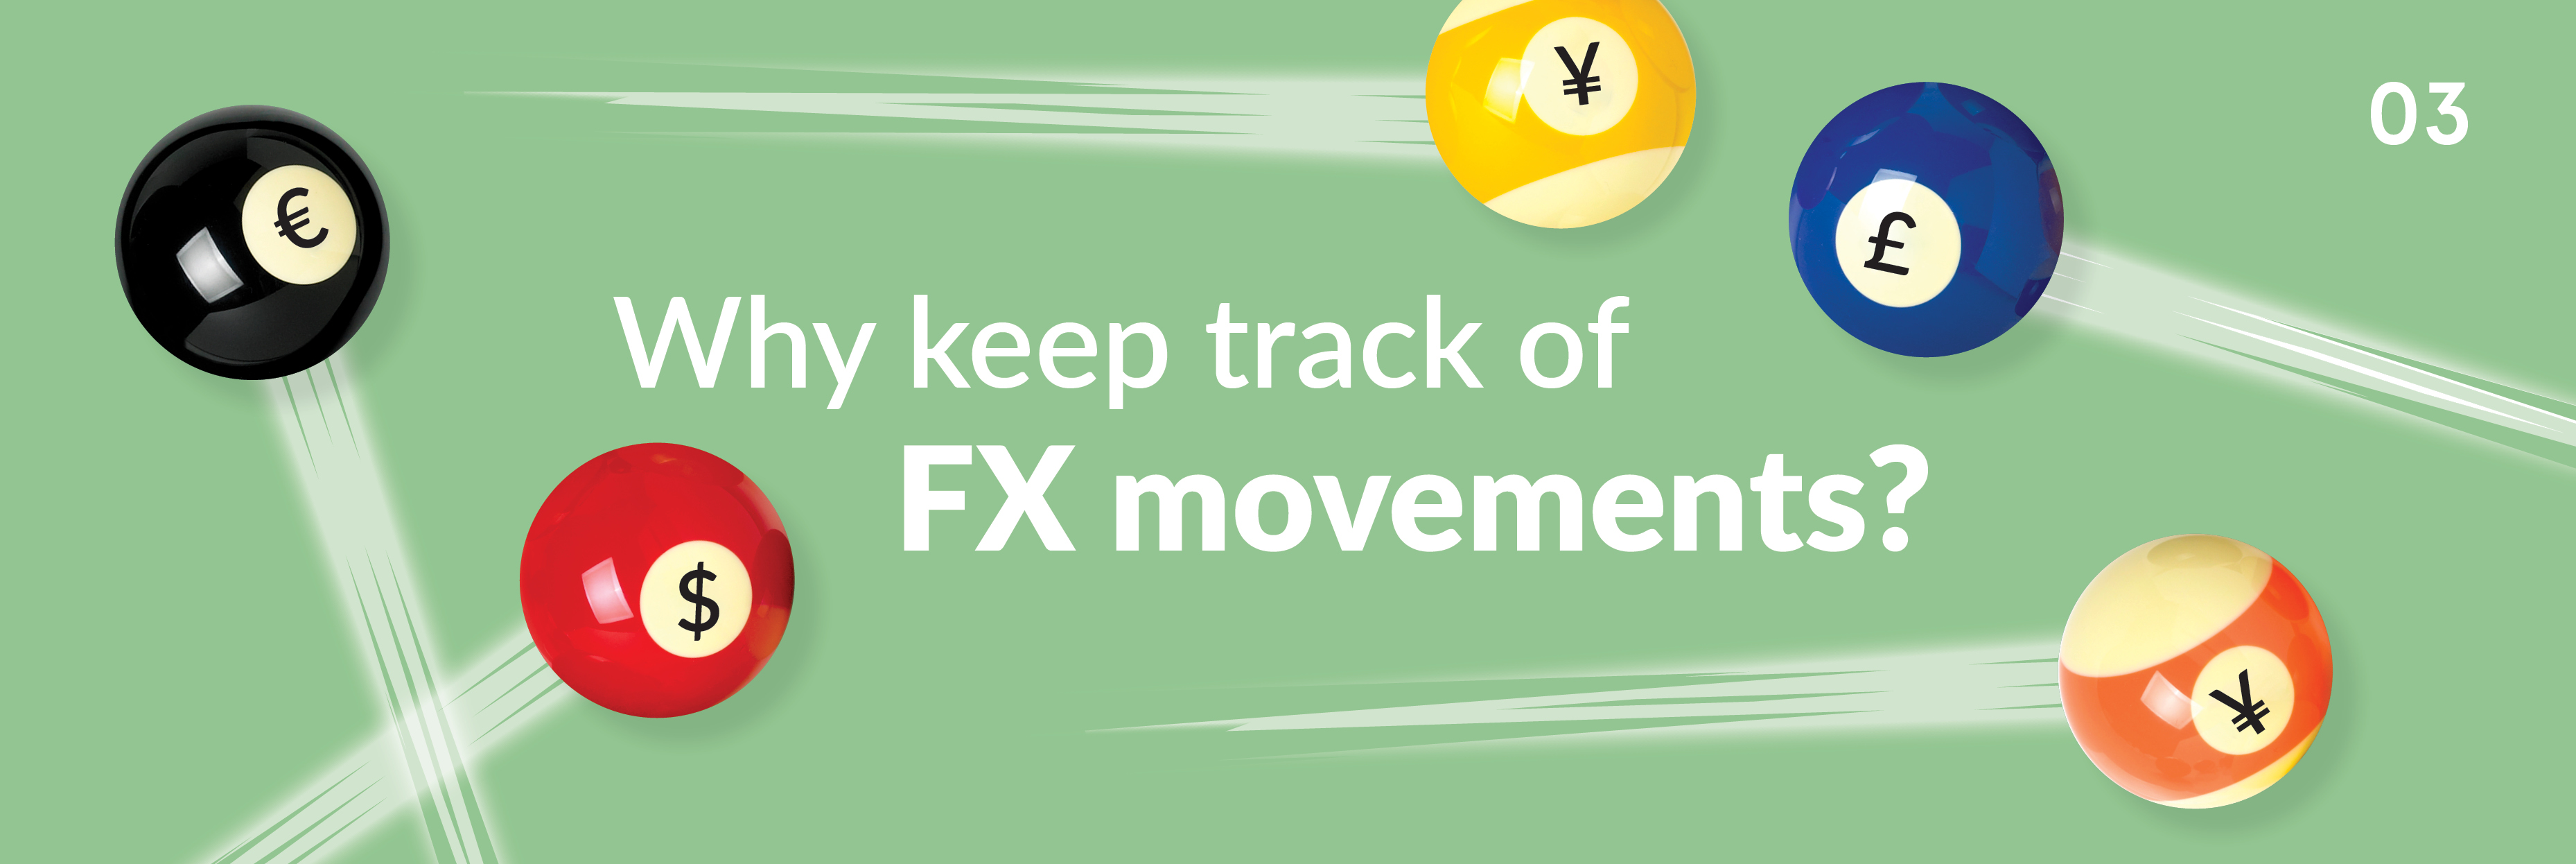 Importance of keeping track of FX movements